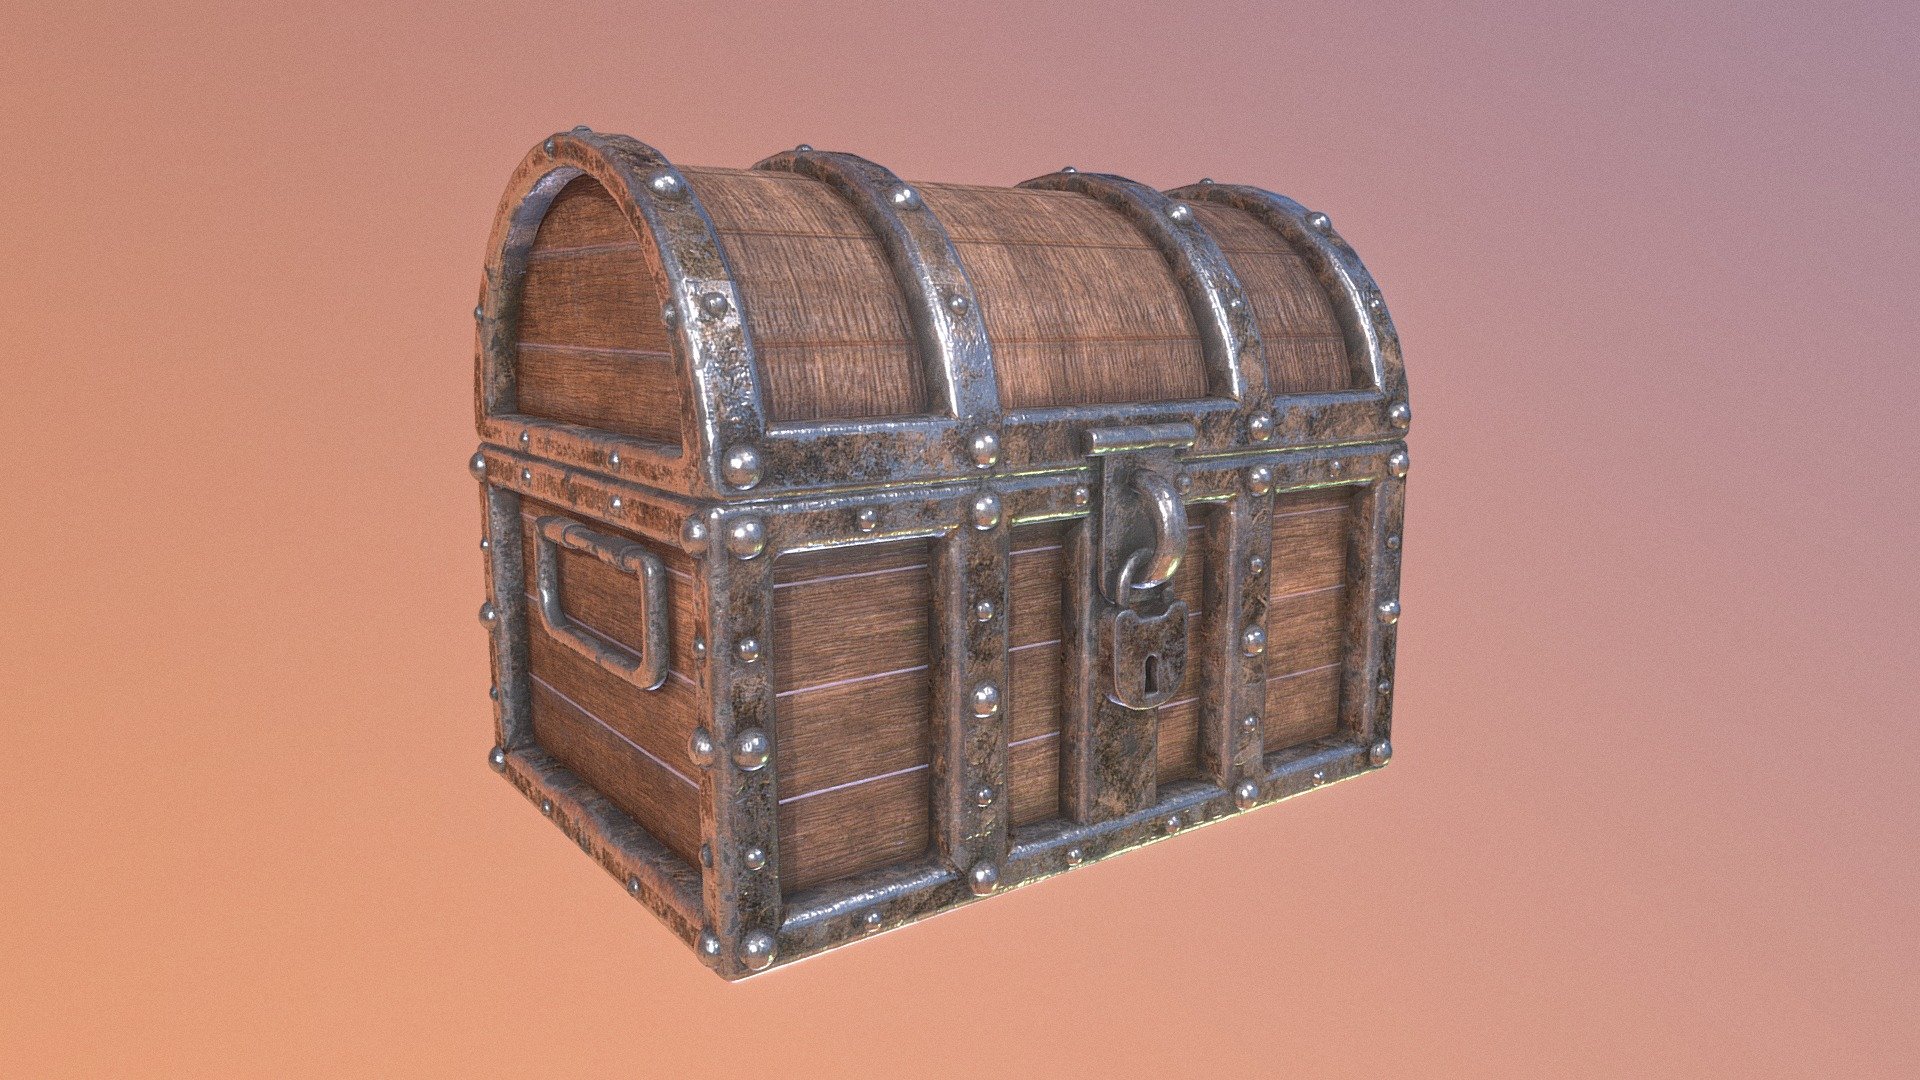 Pirates used these to stash their most valuable belongings and locked the chest with a key. However they always seem to lose those to the sea&hellip; - Treasure Chest - Buy Royalty Free 3D model by Harold P. de Boer (@Harold1995) 3d model